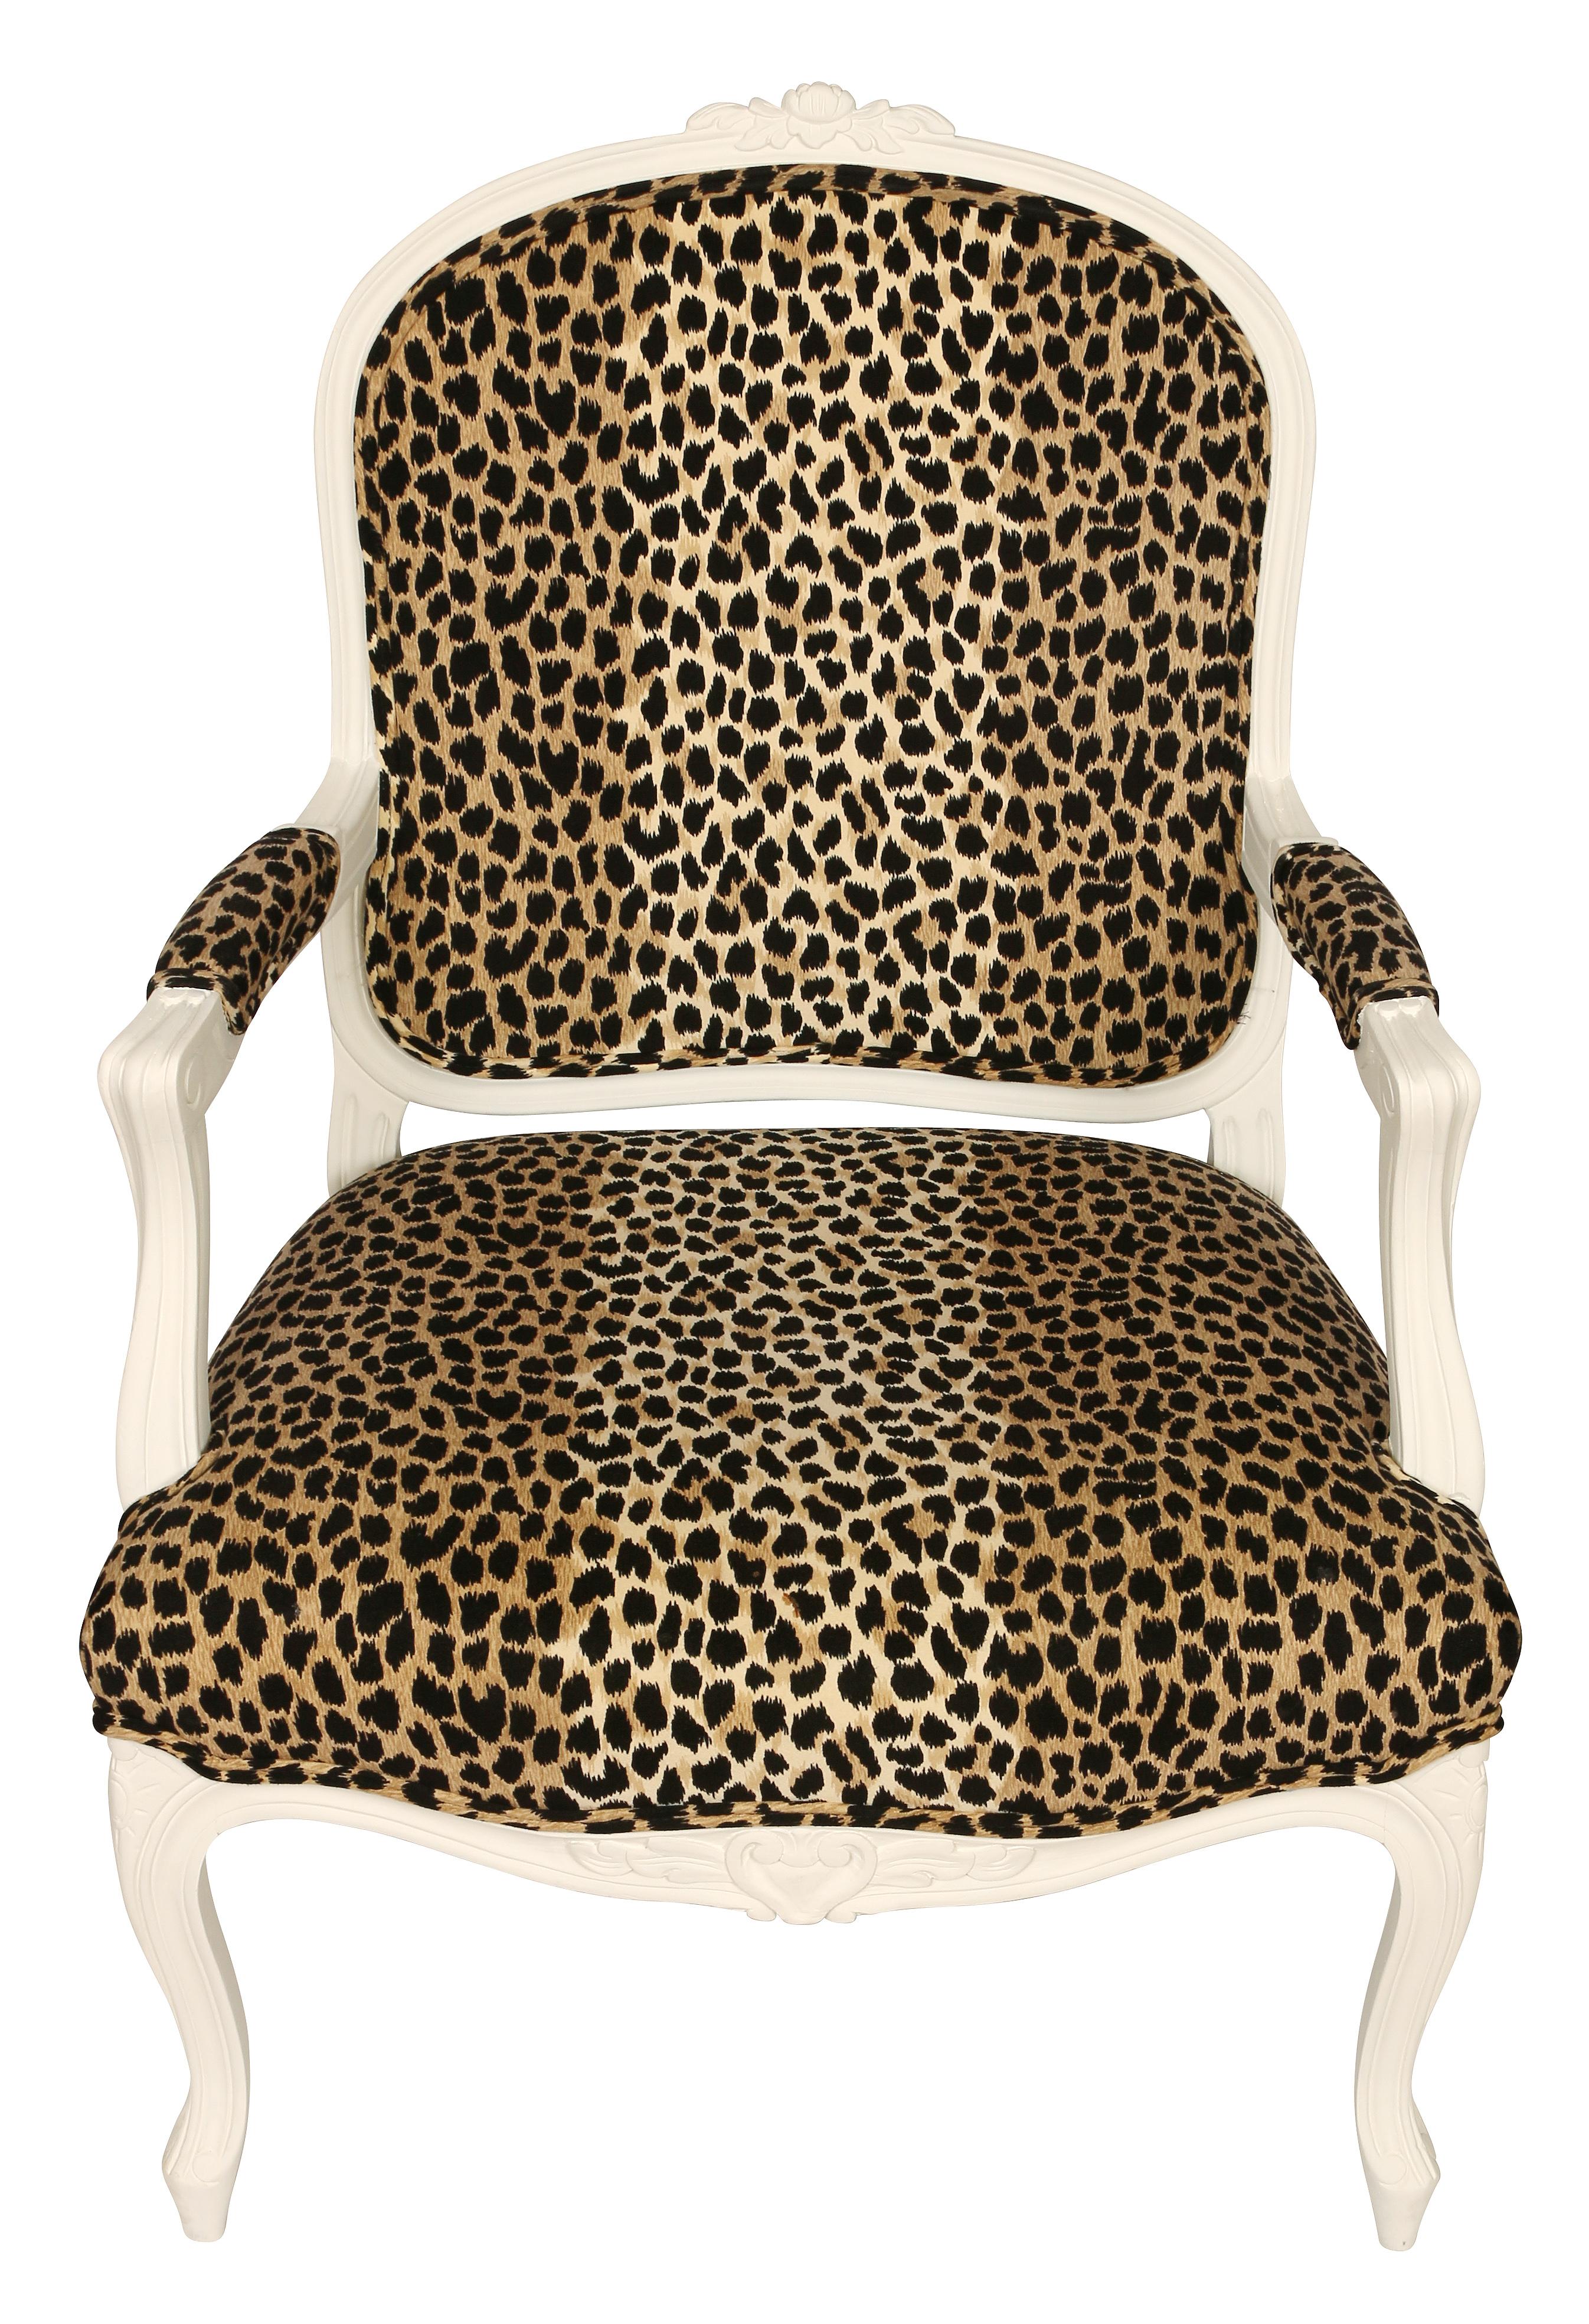 A pair of white painted Louis XV style chairs in leopard fabric. Carved details to chair frame.